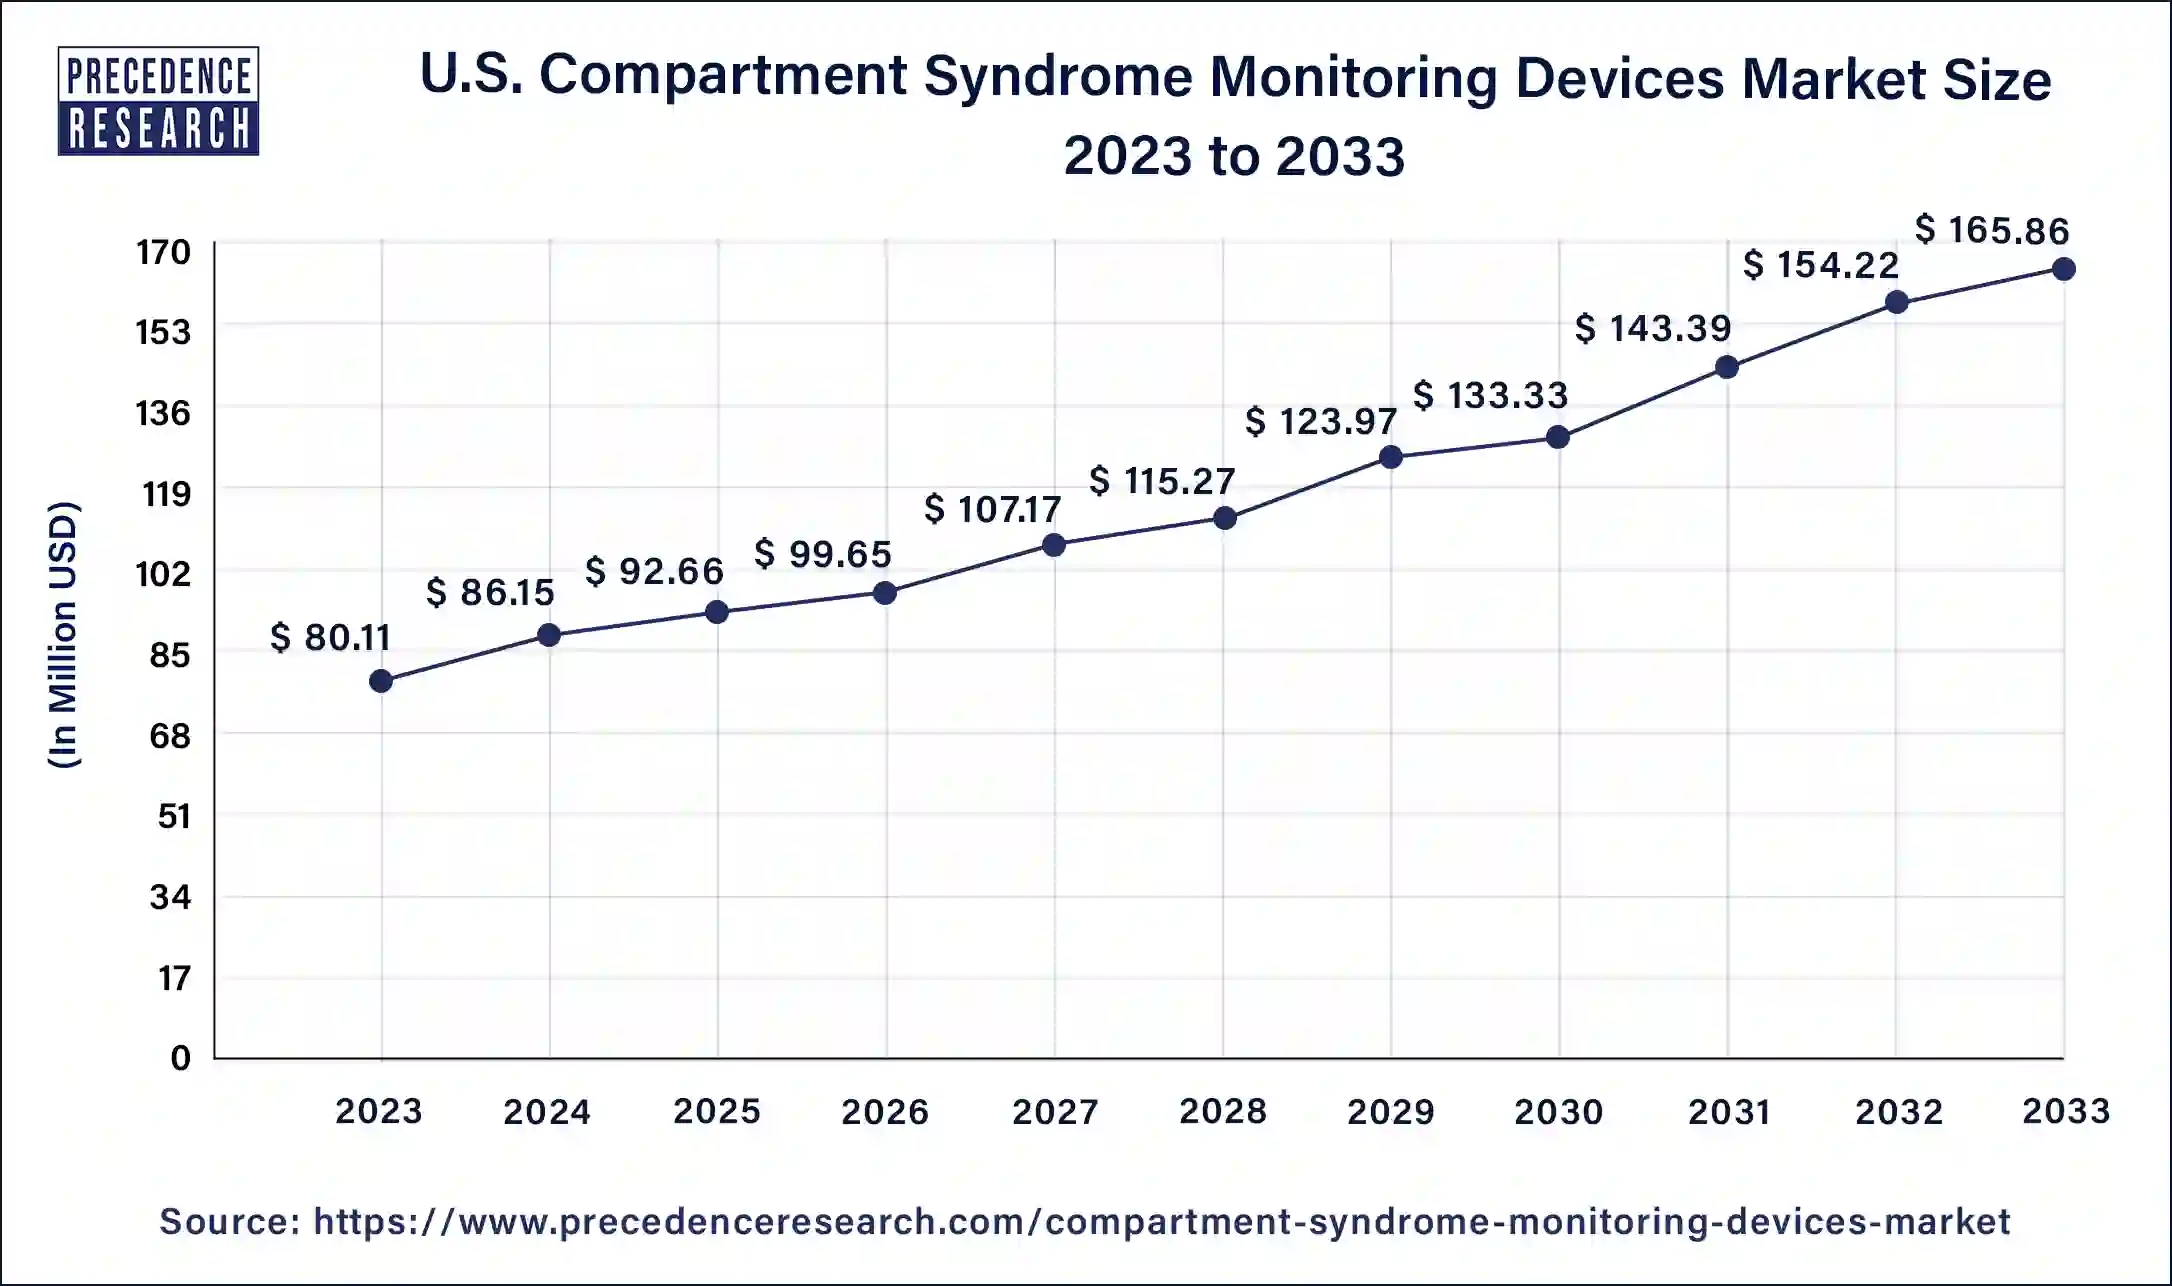 U.S. Compartment Syndrome Monitoring Devices Market Size 2024 to 2033